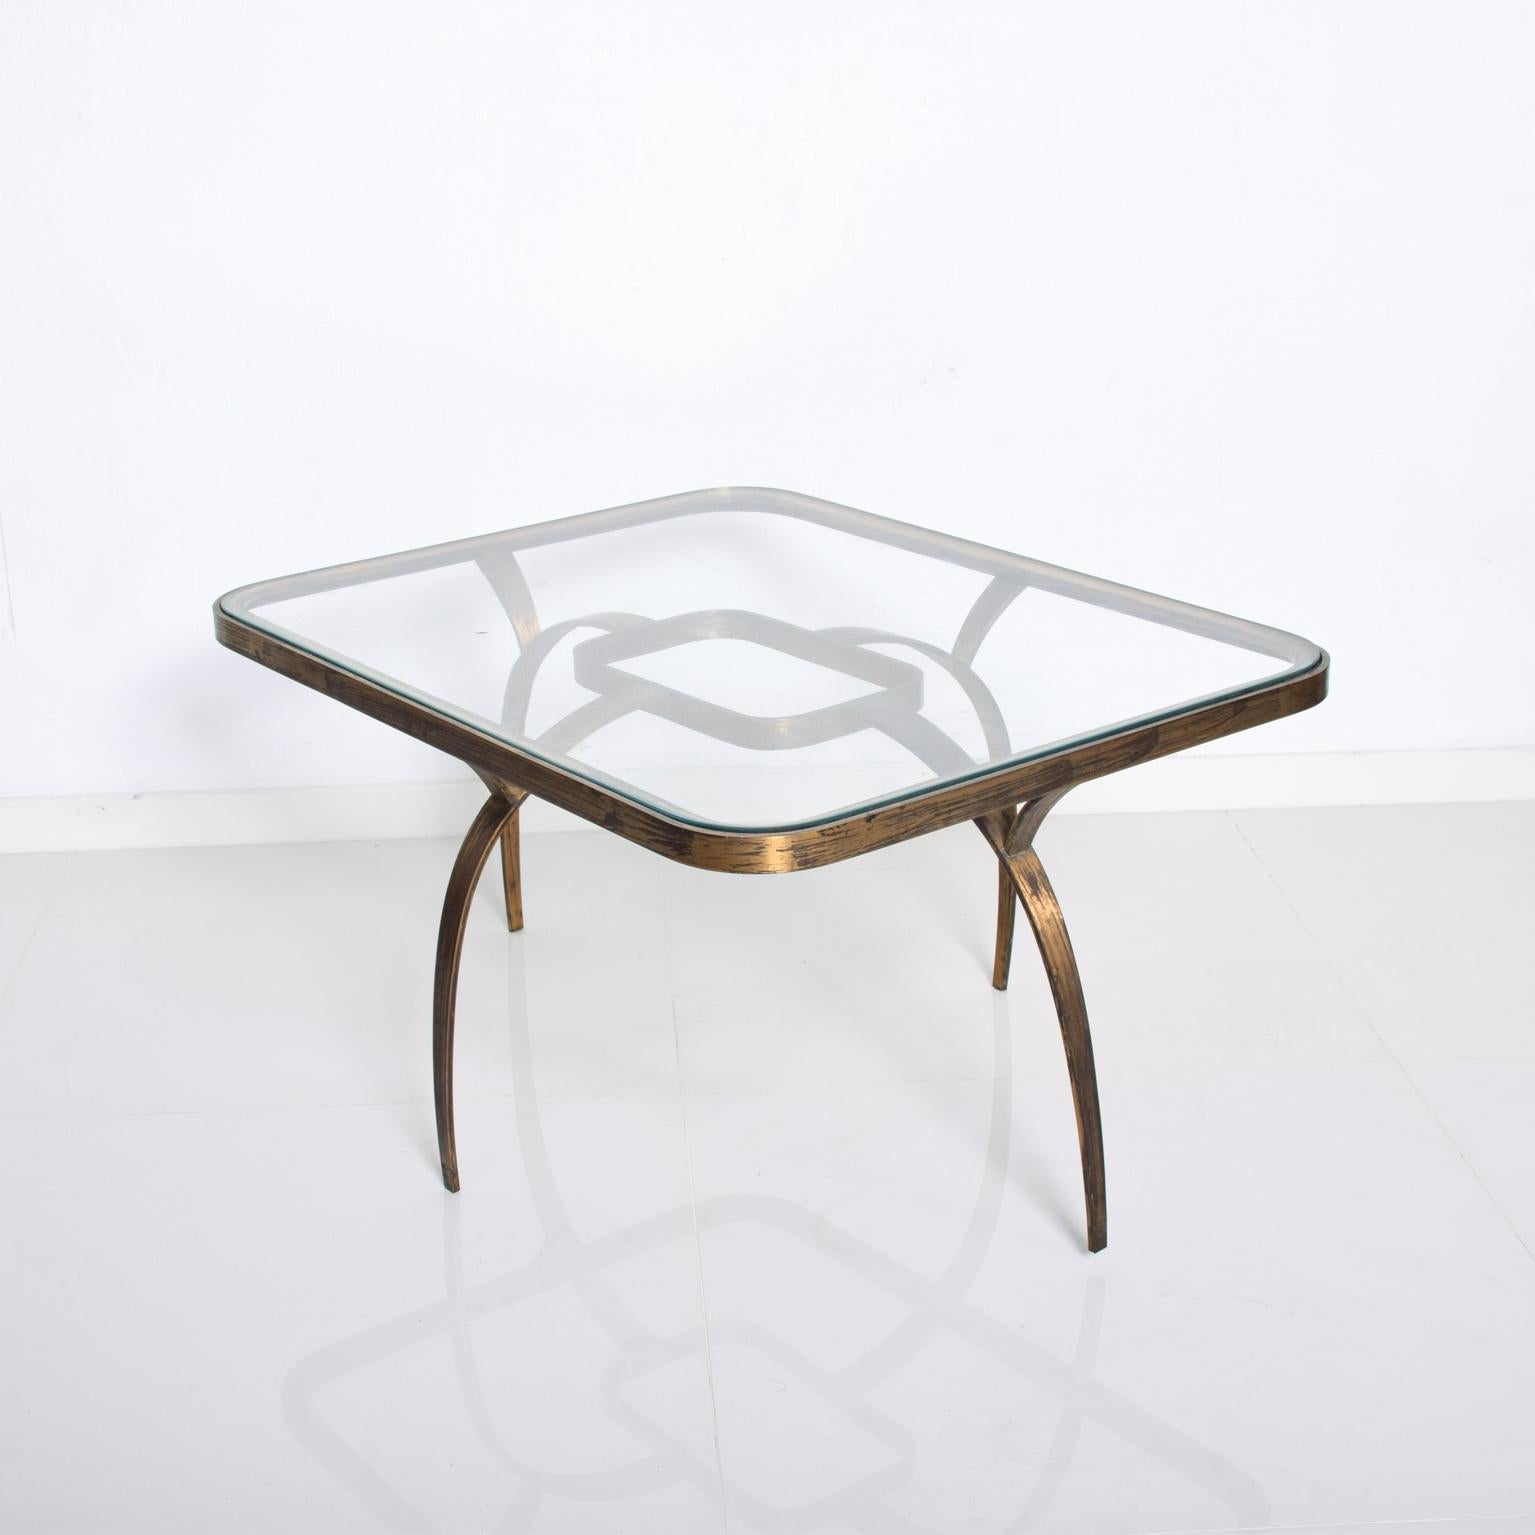 AMBIANIC presents:
Mid Century Mexican Modernist Side Coffee Table Sculptural Bronze attributed to Arturo Pani  
Constructed with bronze and glass table top. Attributed to Arturo Mexico 1950s. Unmarked.
Rectangular shape with round corners and